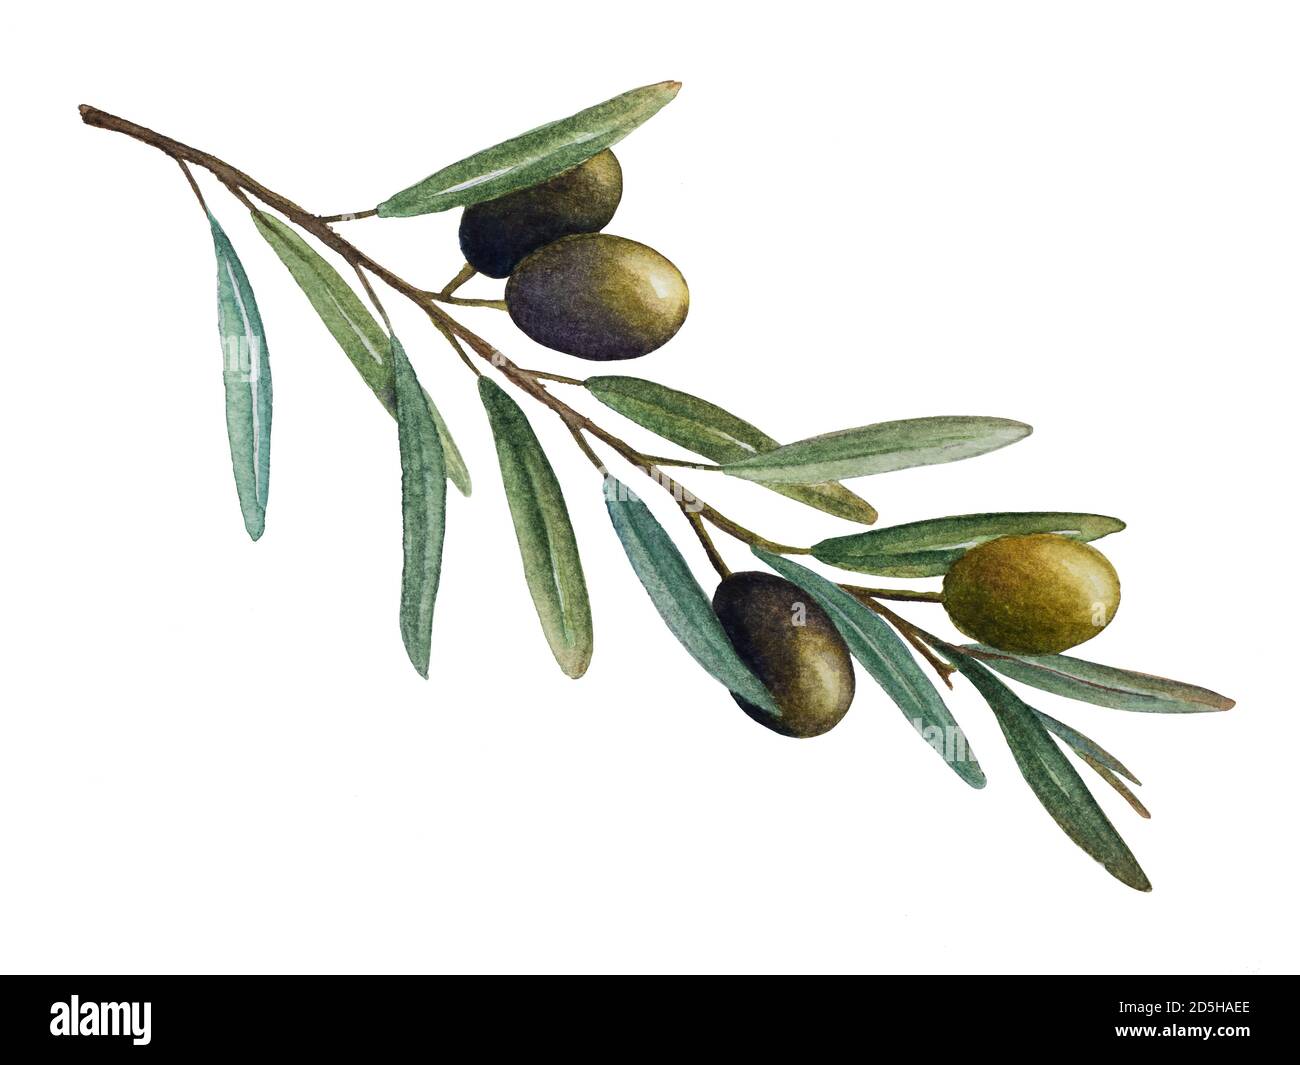 Olive branch with green olives watercolor illustration Stock Photo - Alamy